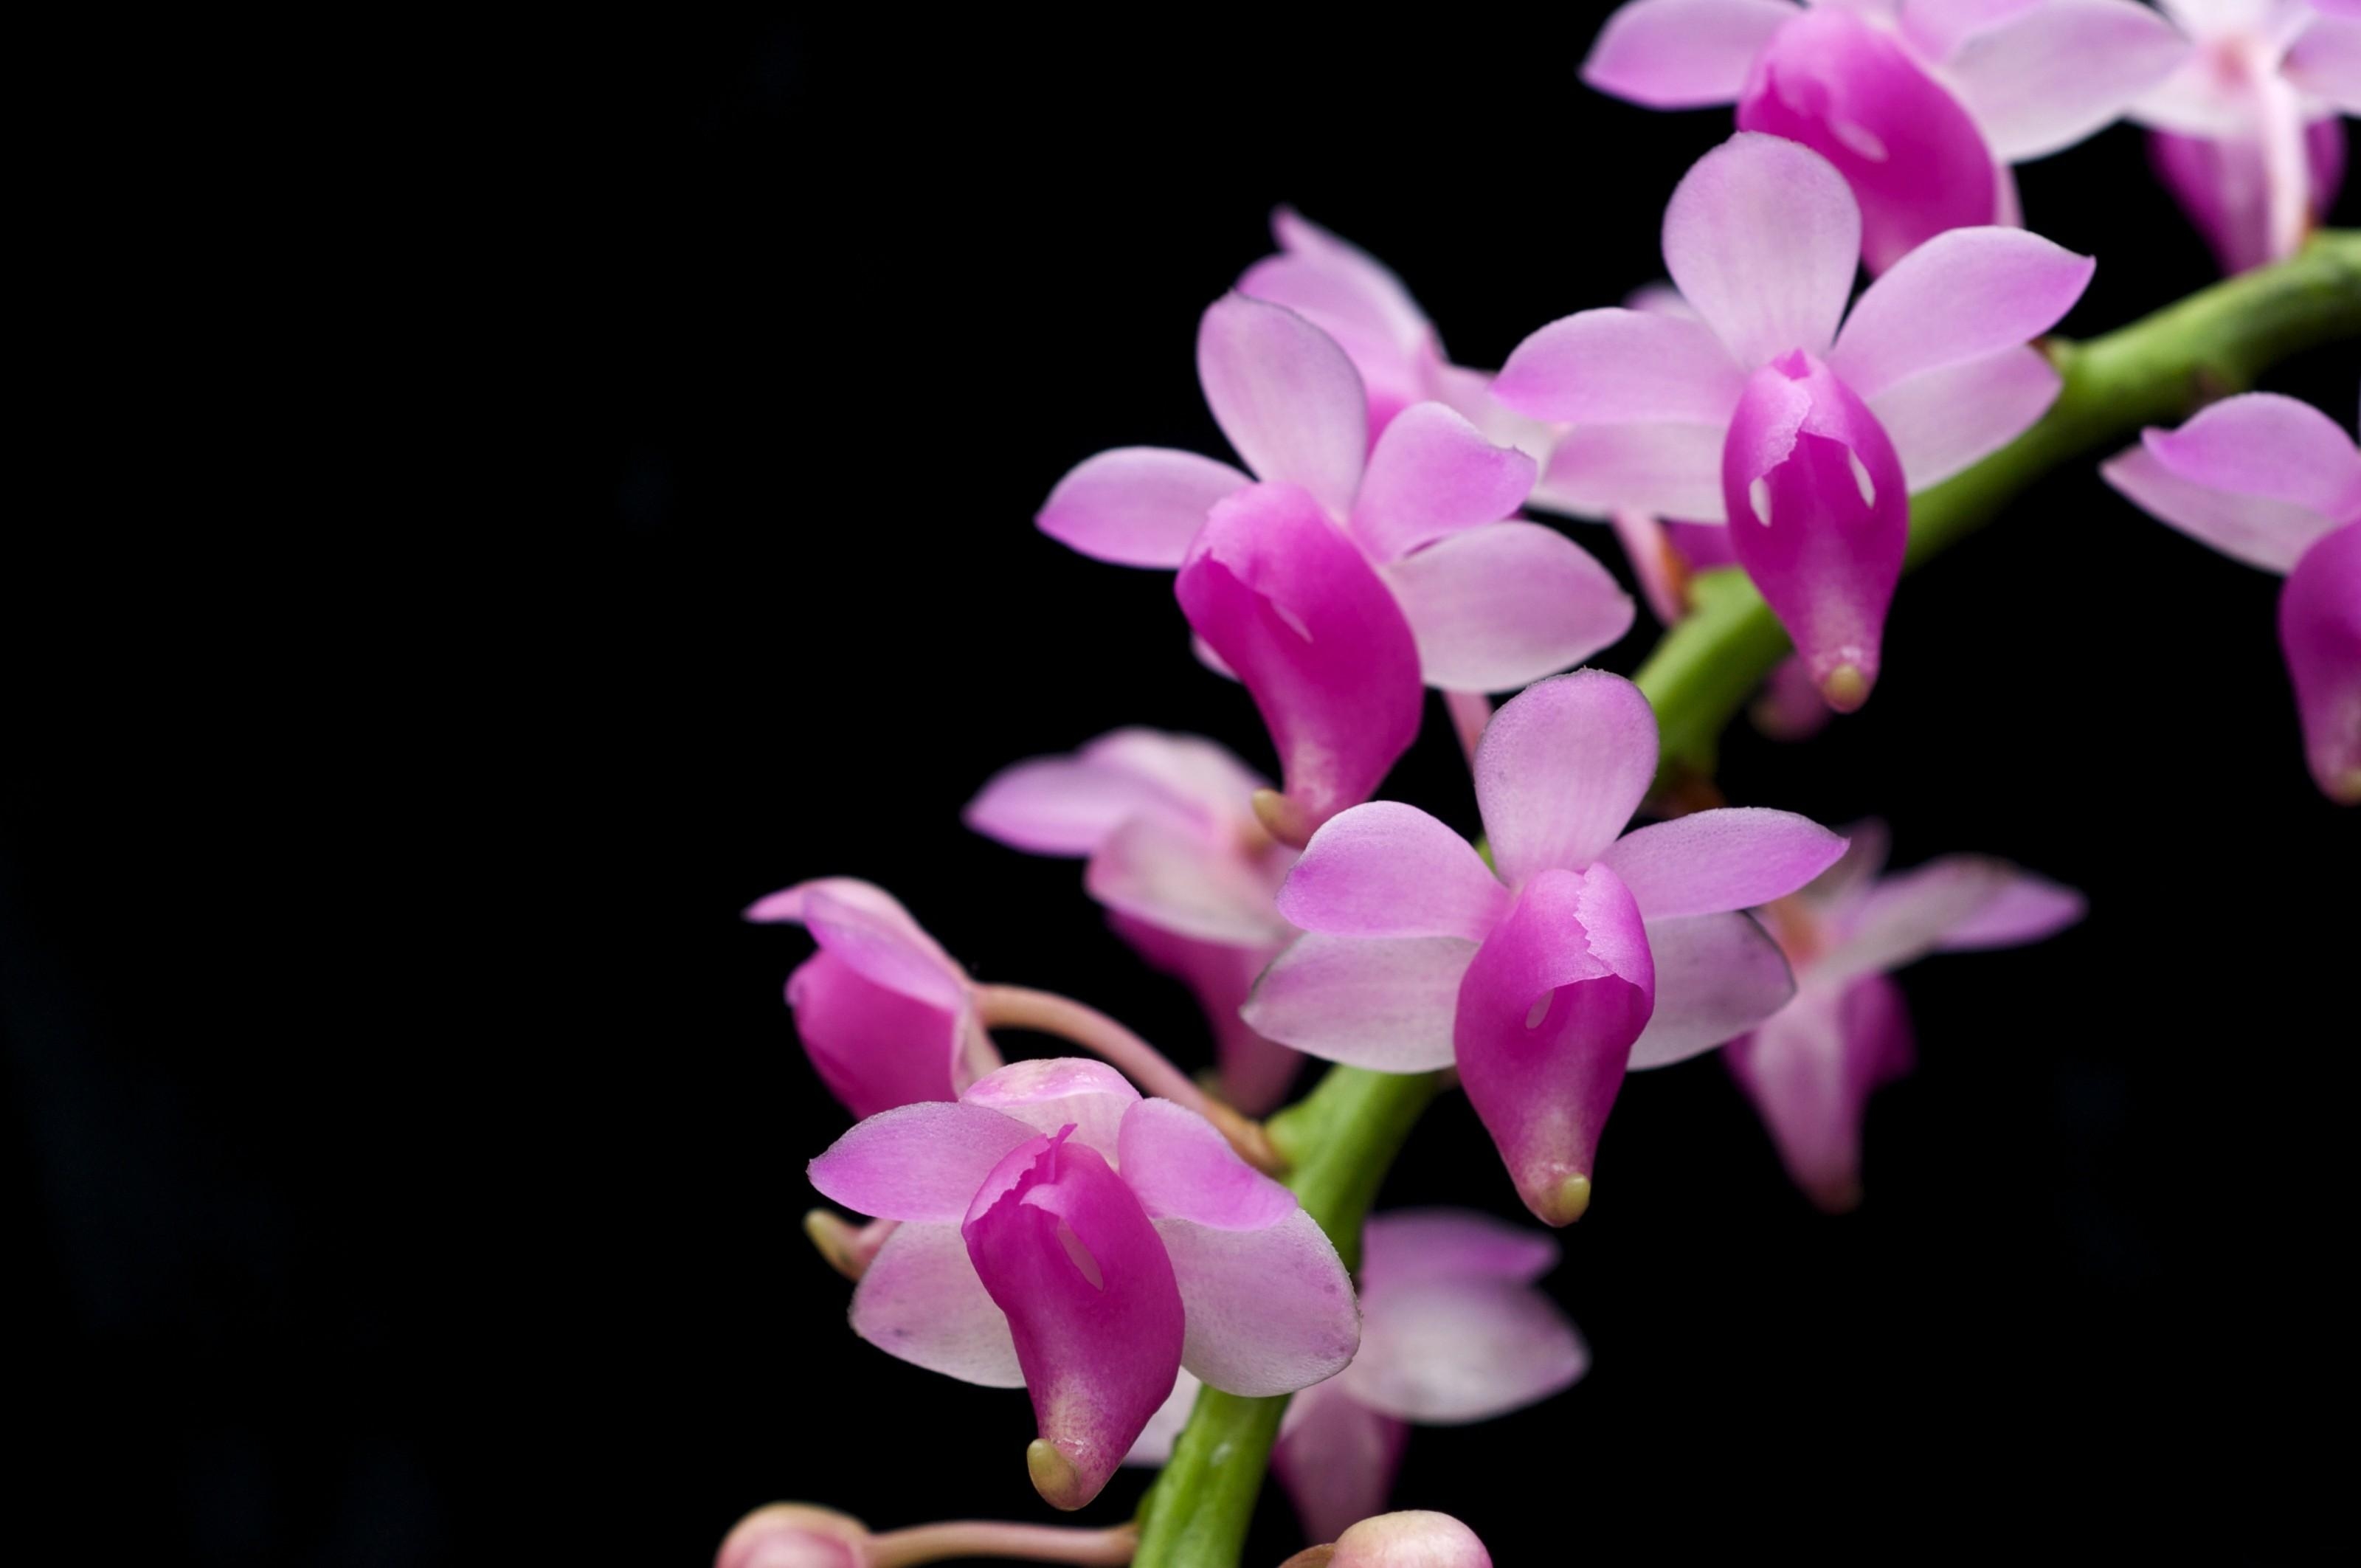 Download Wallpaper 3200x2125 Orchid Branch Exotic Black Background Hd Background